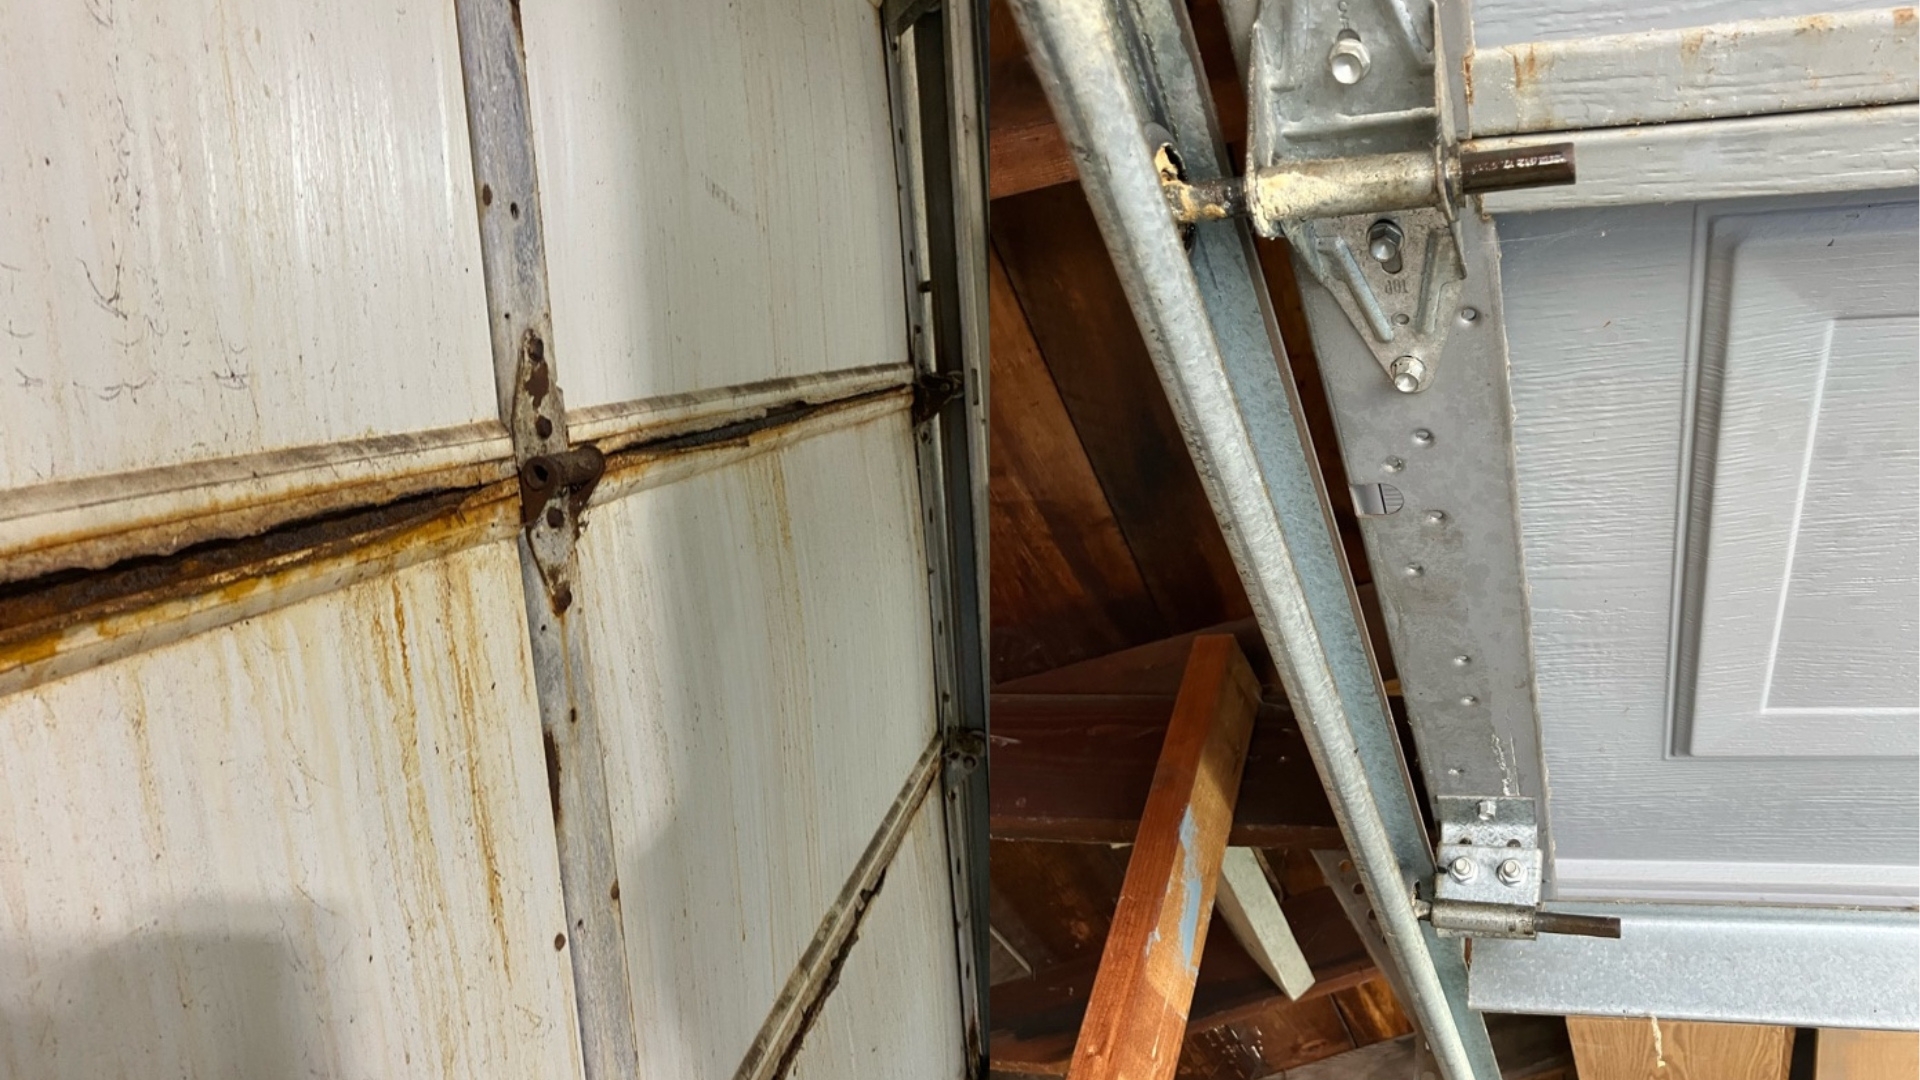 Garage door hinges with rust and corrosion